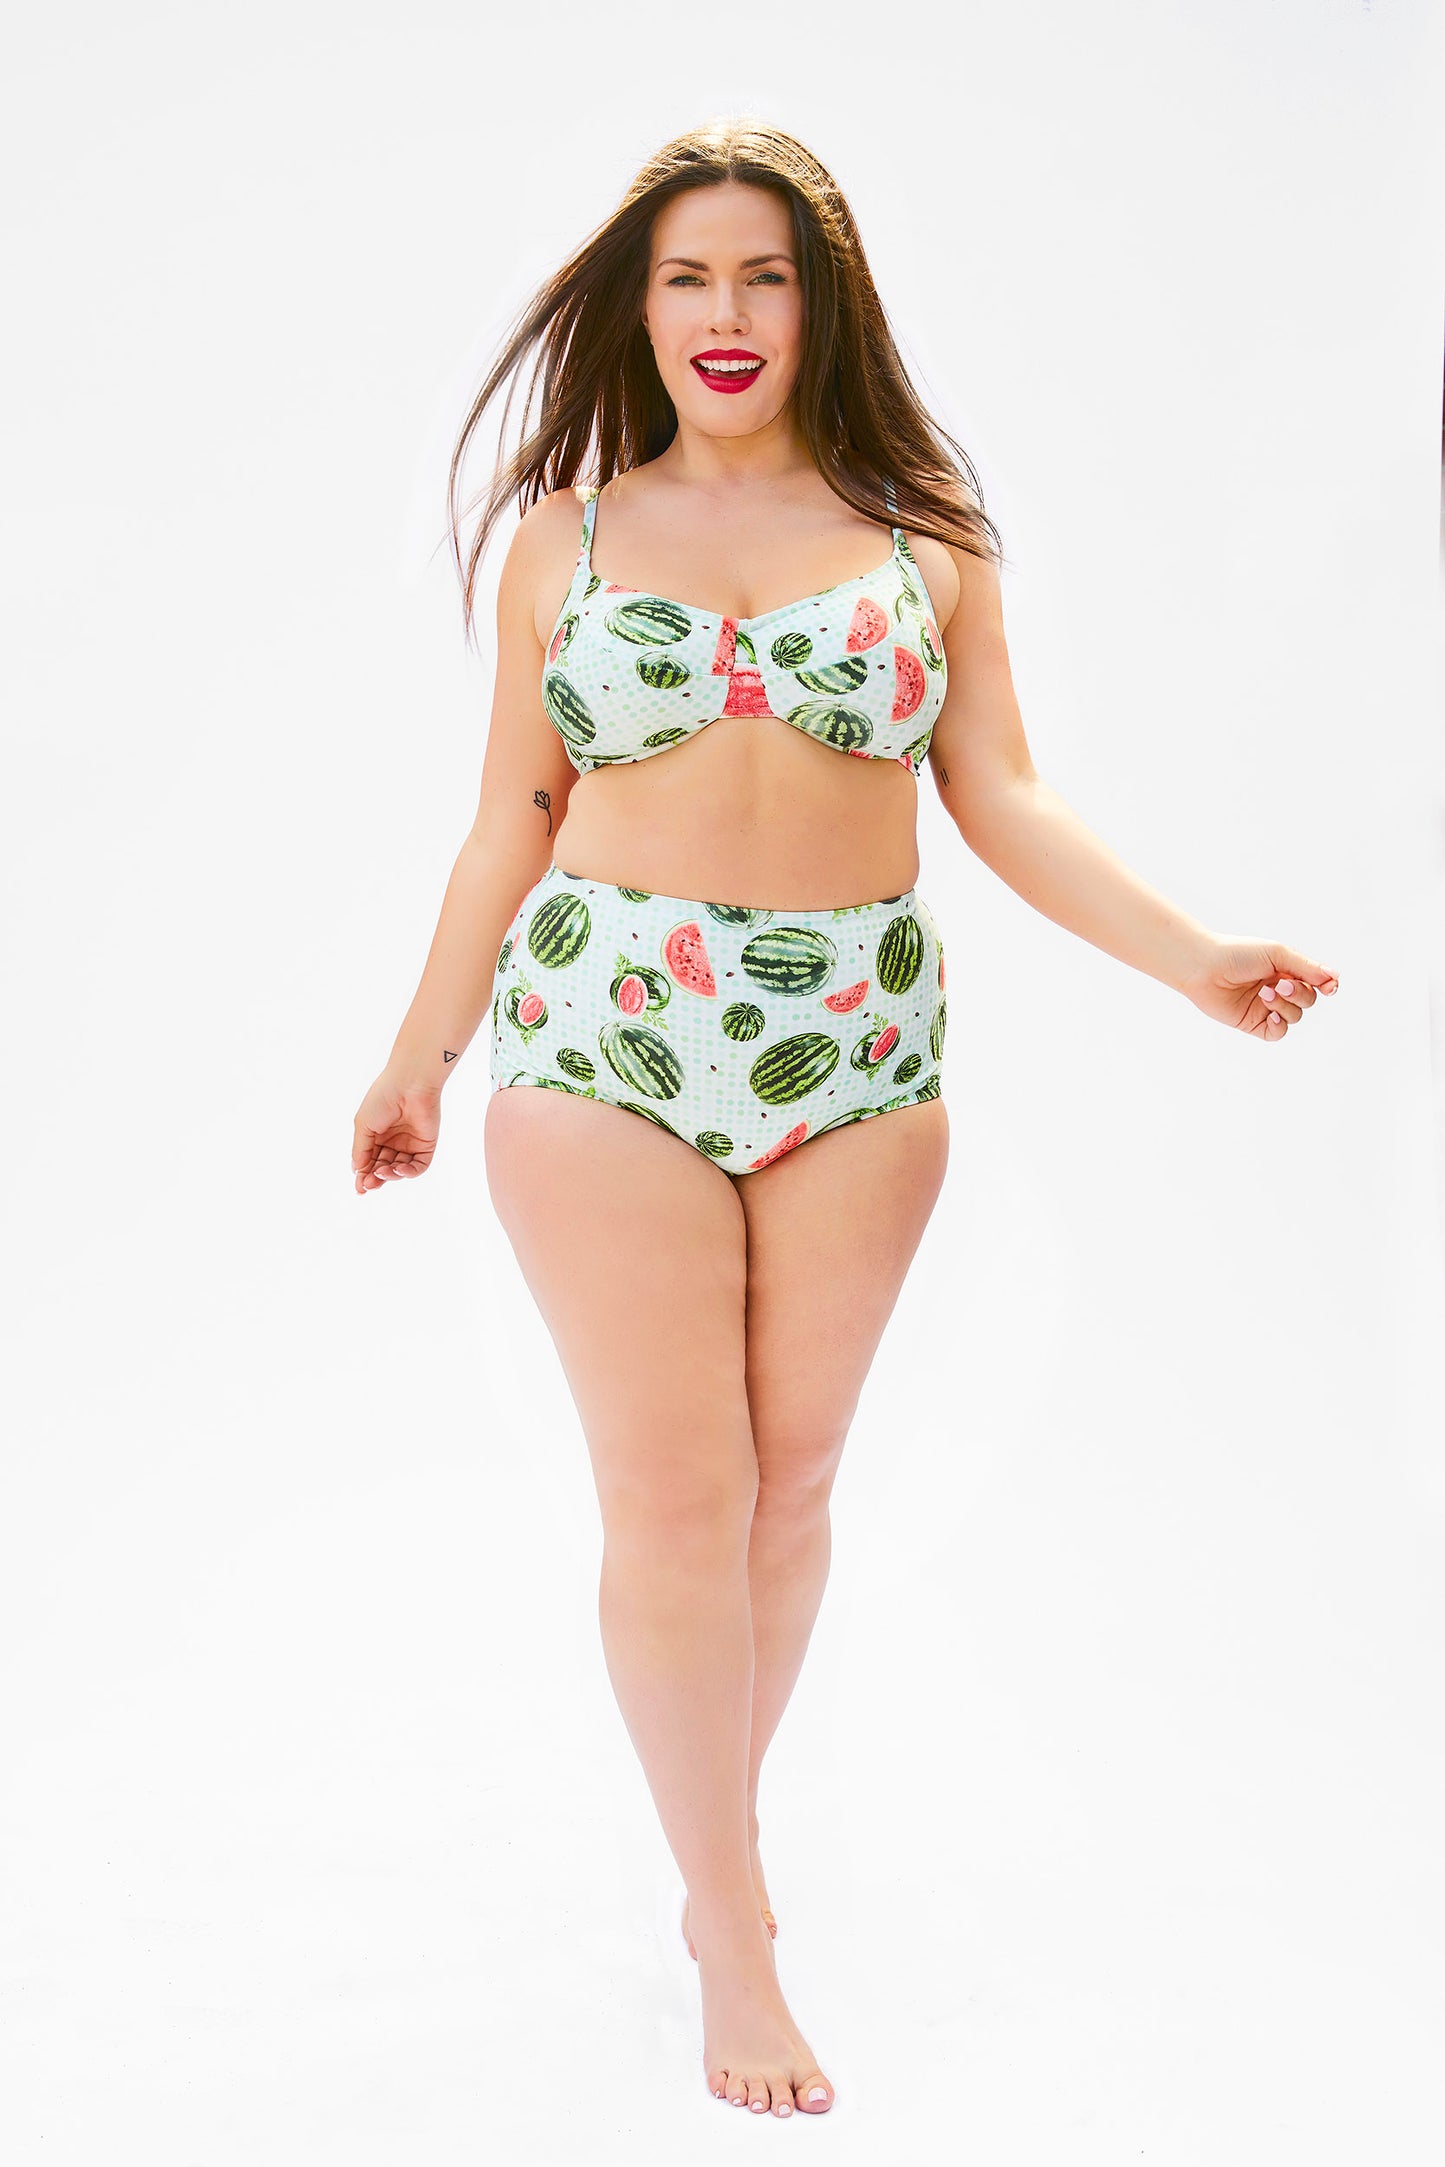 fruit pattern bikini for plus size women with high waist bottom and supportive top, made in Canada by Bathing Belle Swimwear